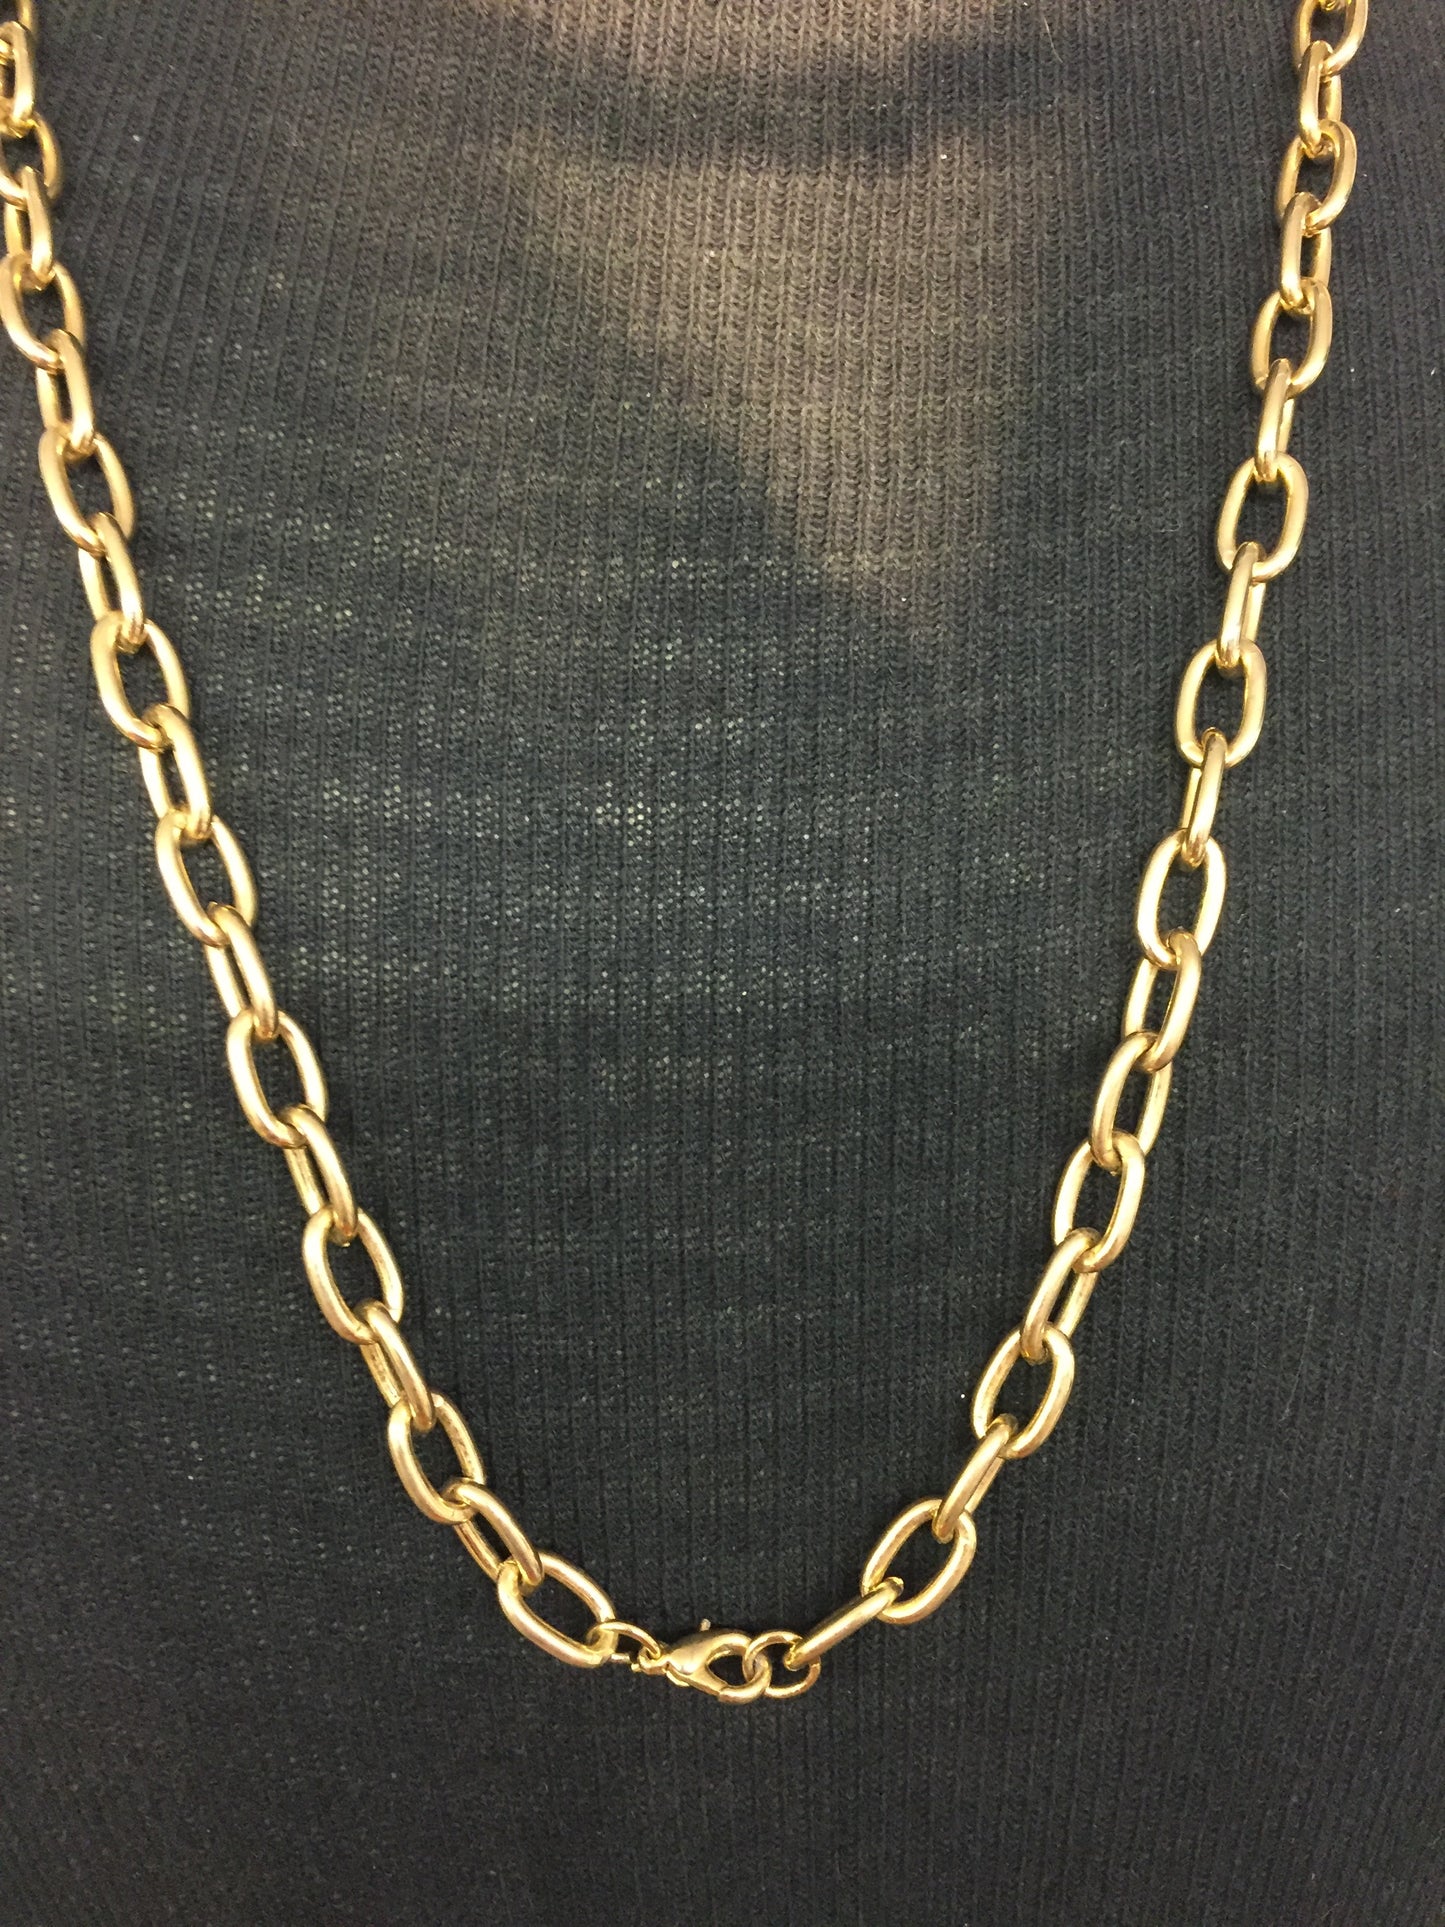 Vintage All Goldtone Double Chain Statement Necklace Unsigned 1980's